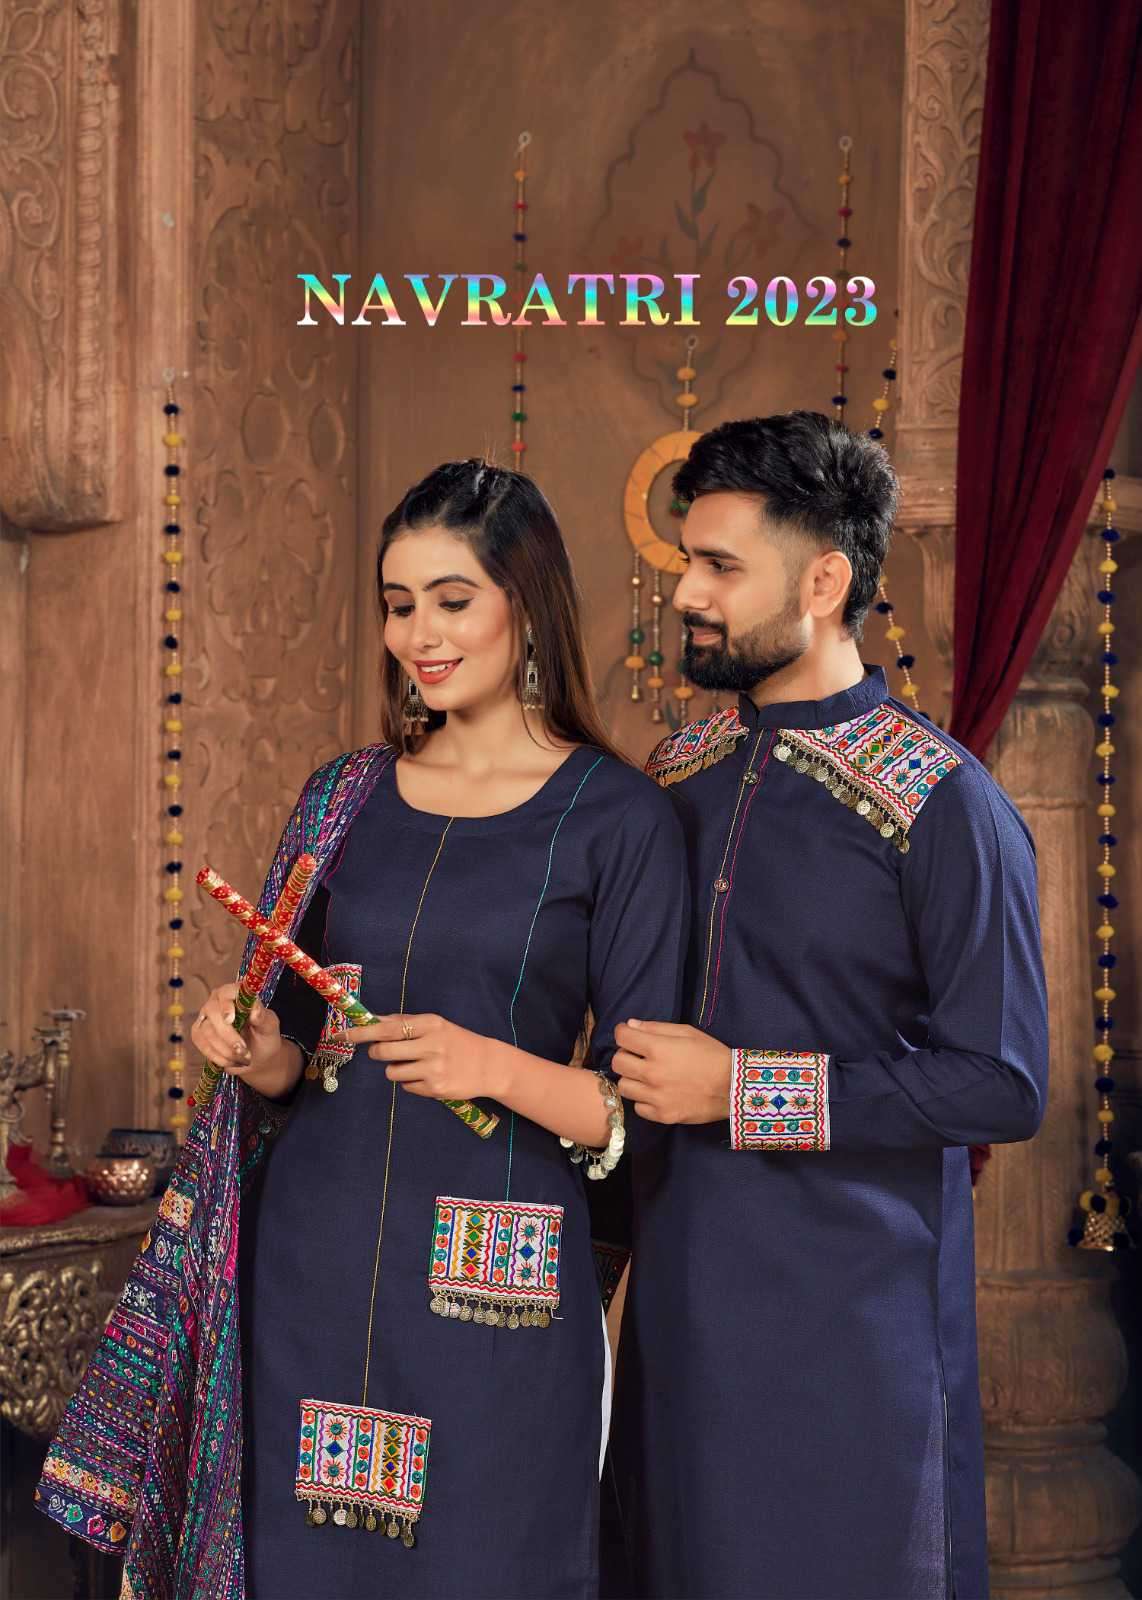 Banwery Navratri 2023 Navratri Special Couple Matching Outfit Latest Designs